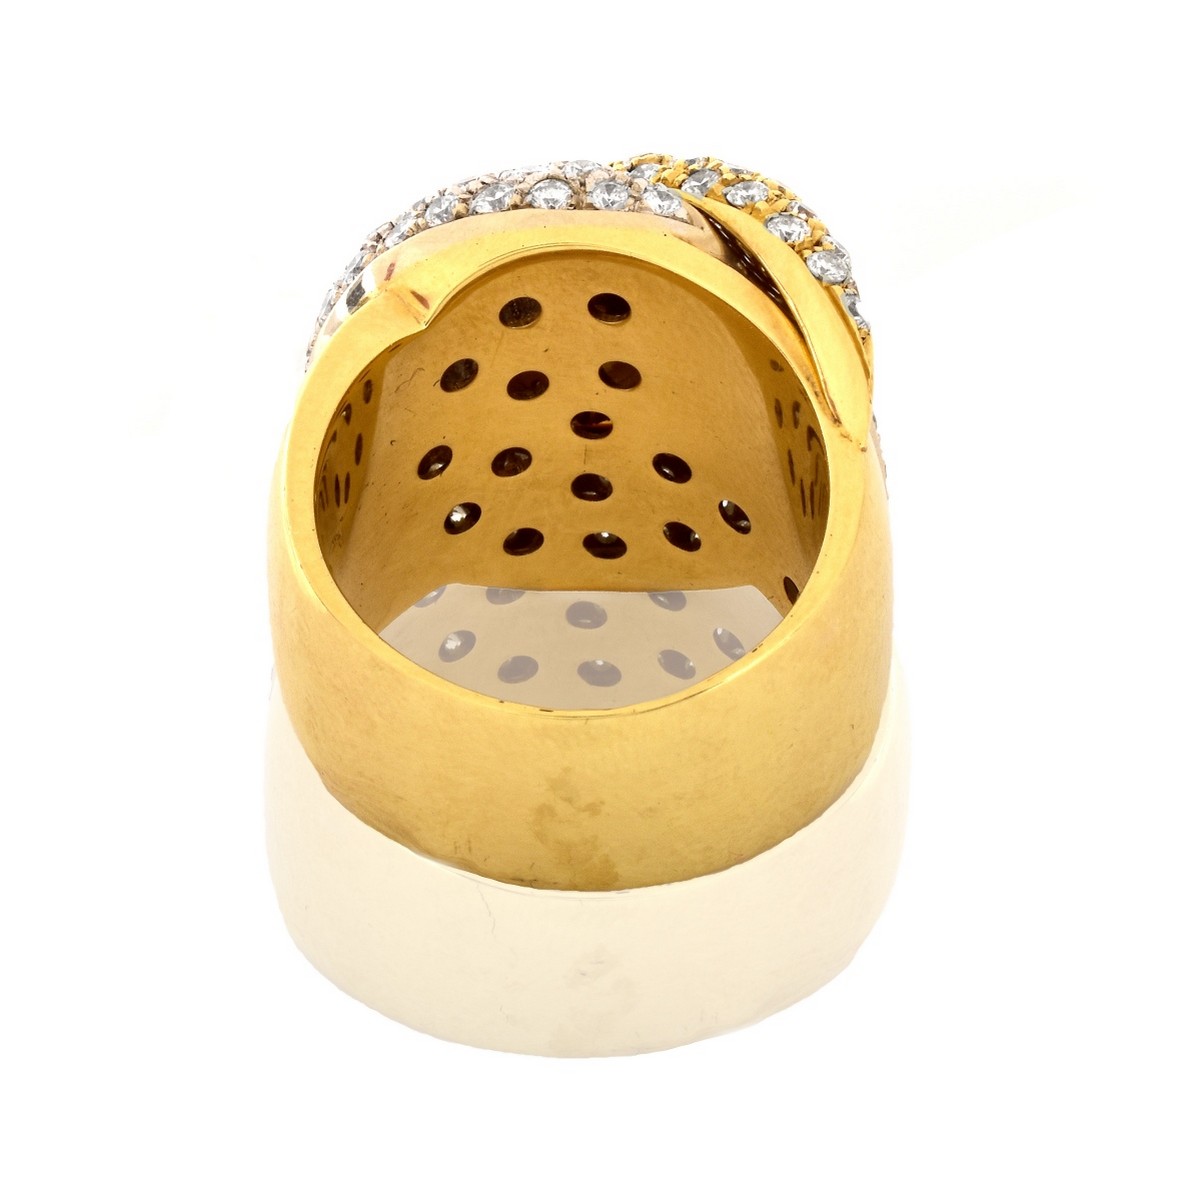 Diamond and 18K Yellow Gold Dinner Ring